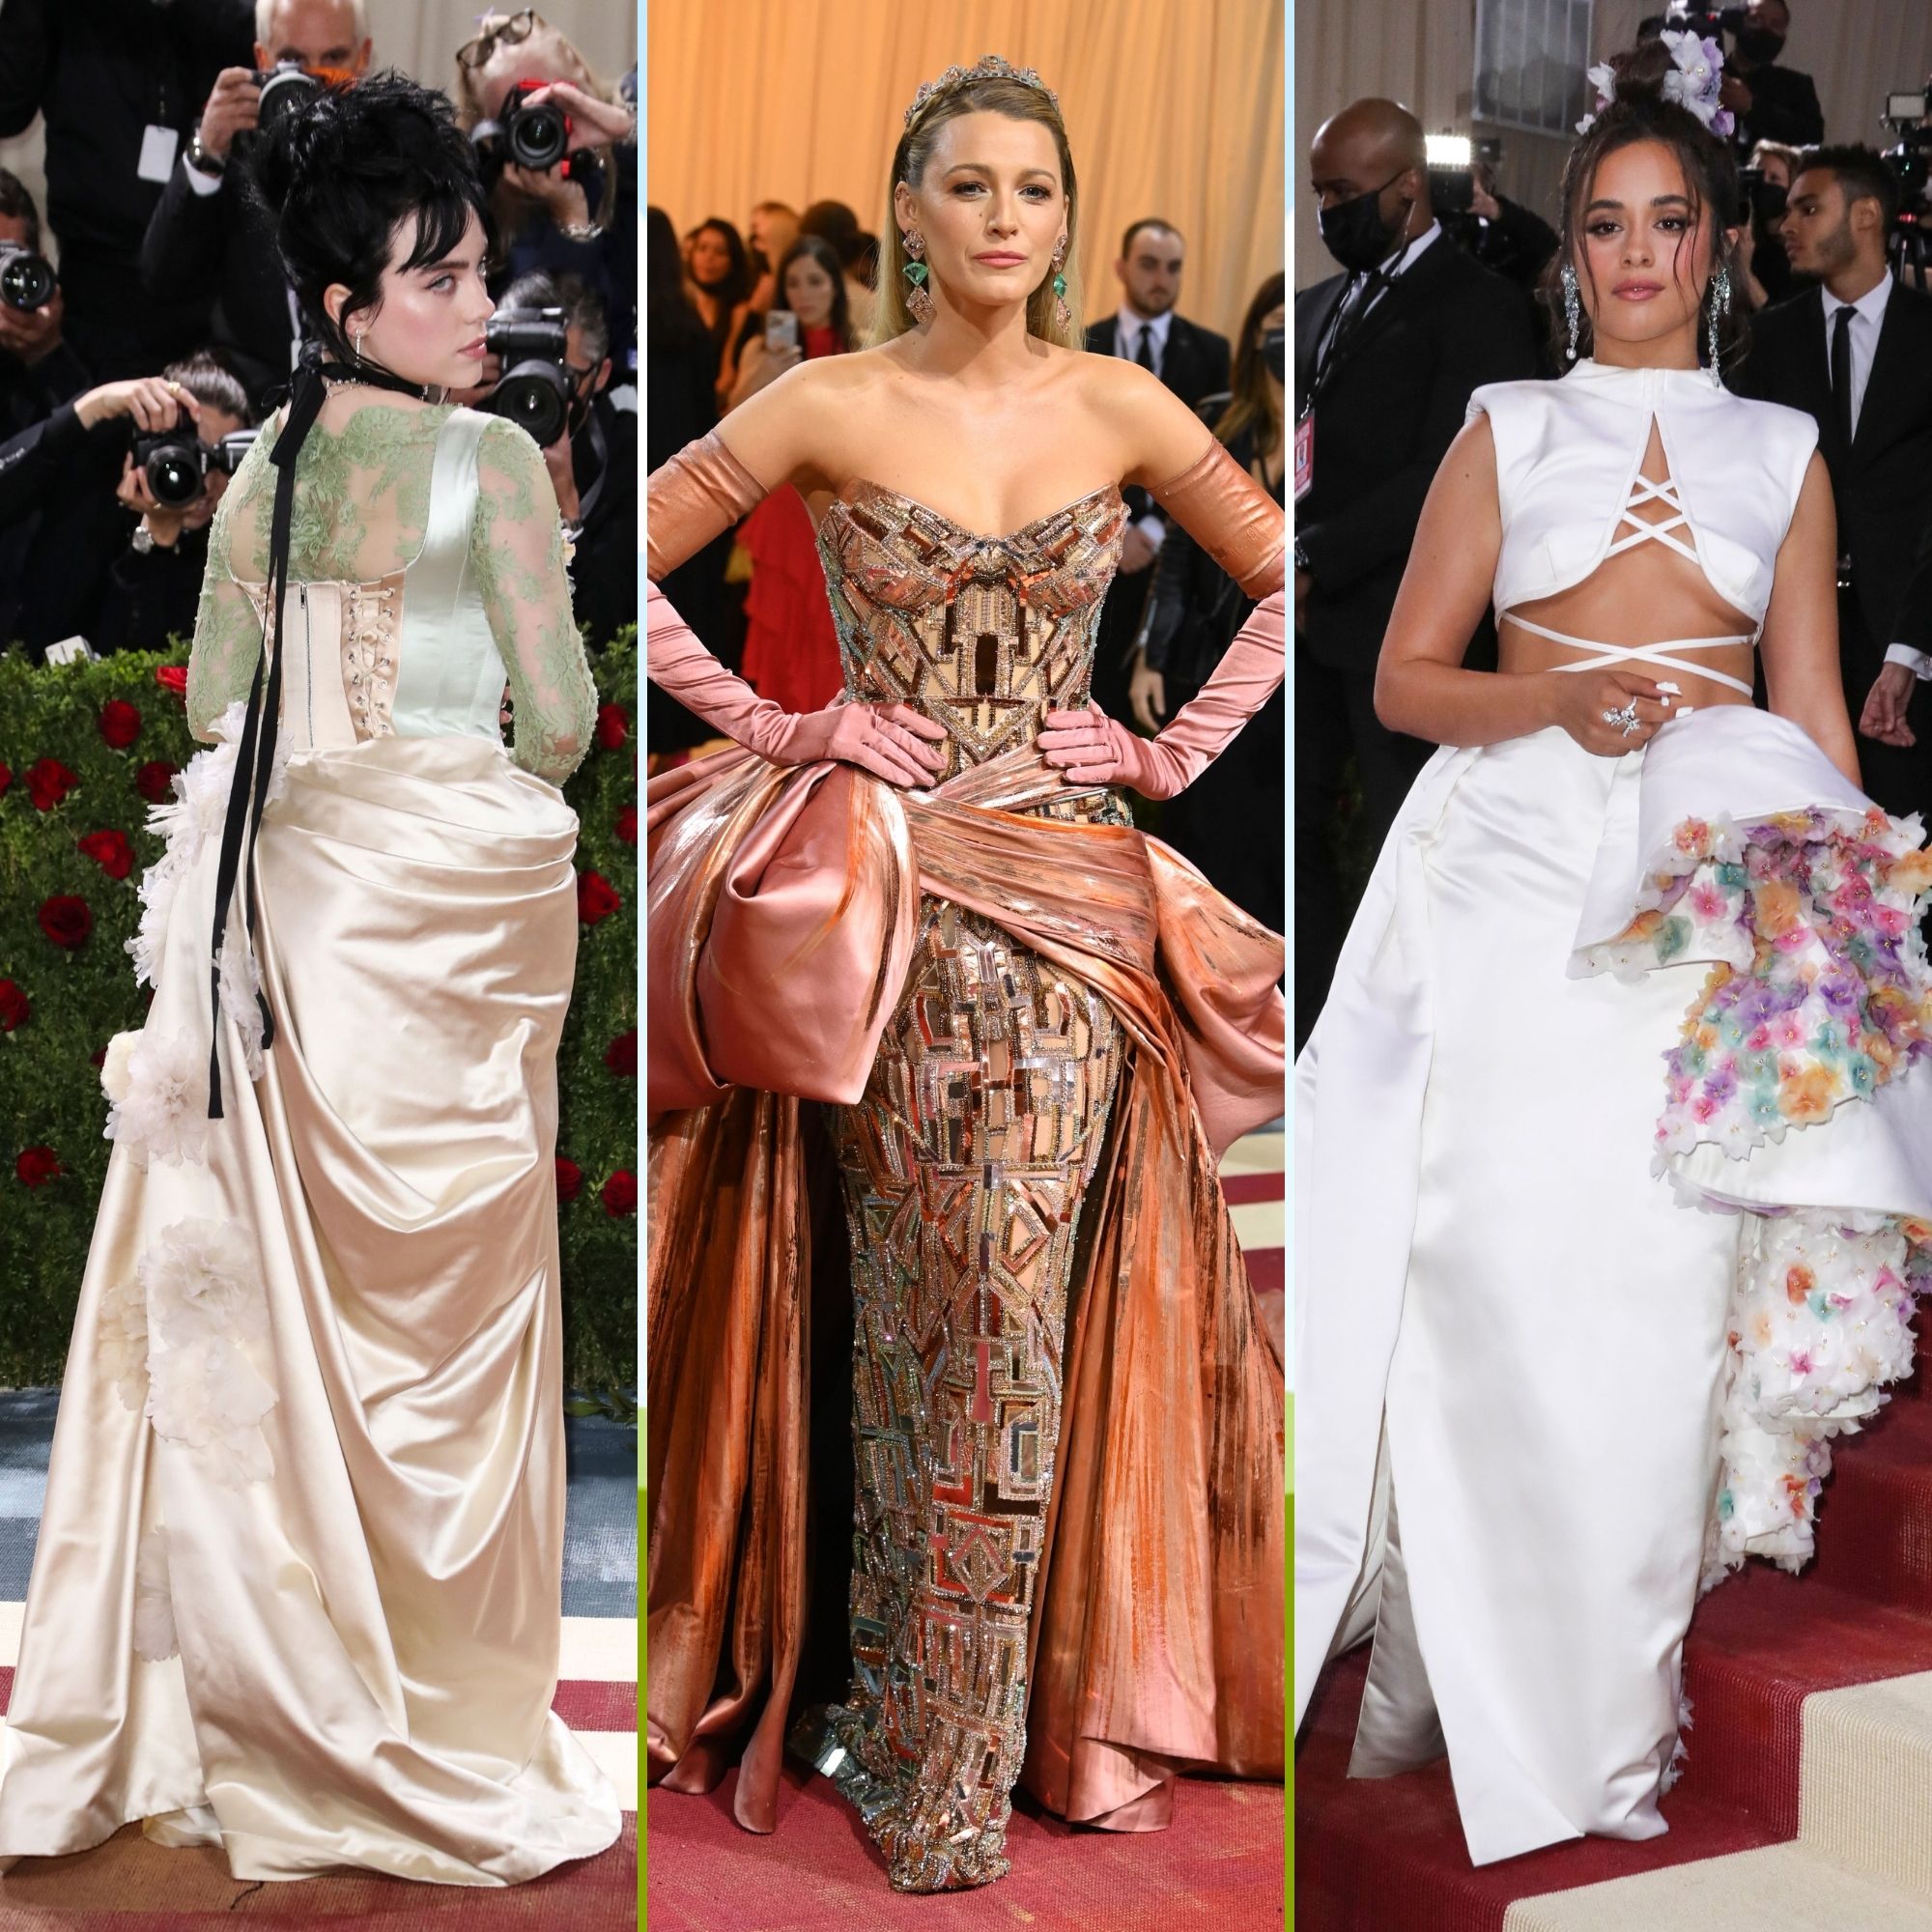 Met Gala 2022 Red Carpet Fashion: What the Stars Wore